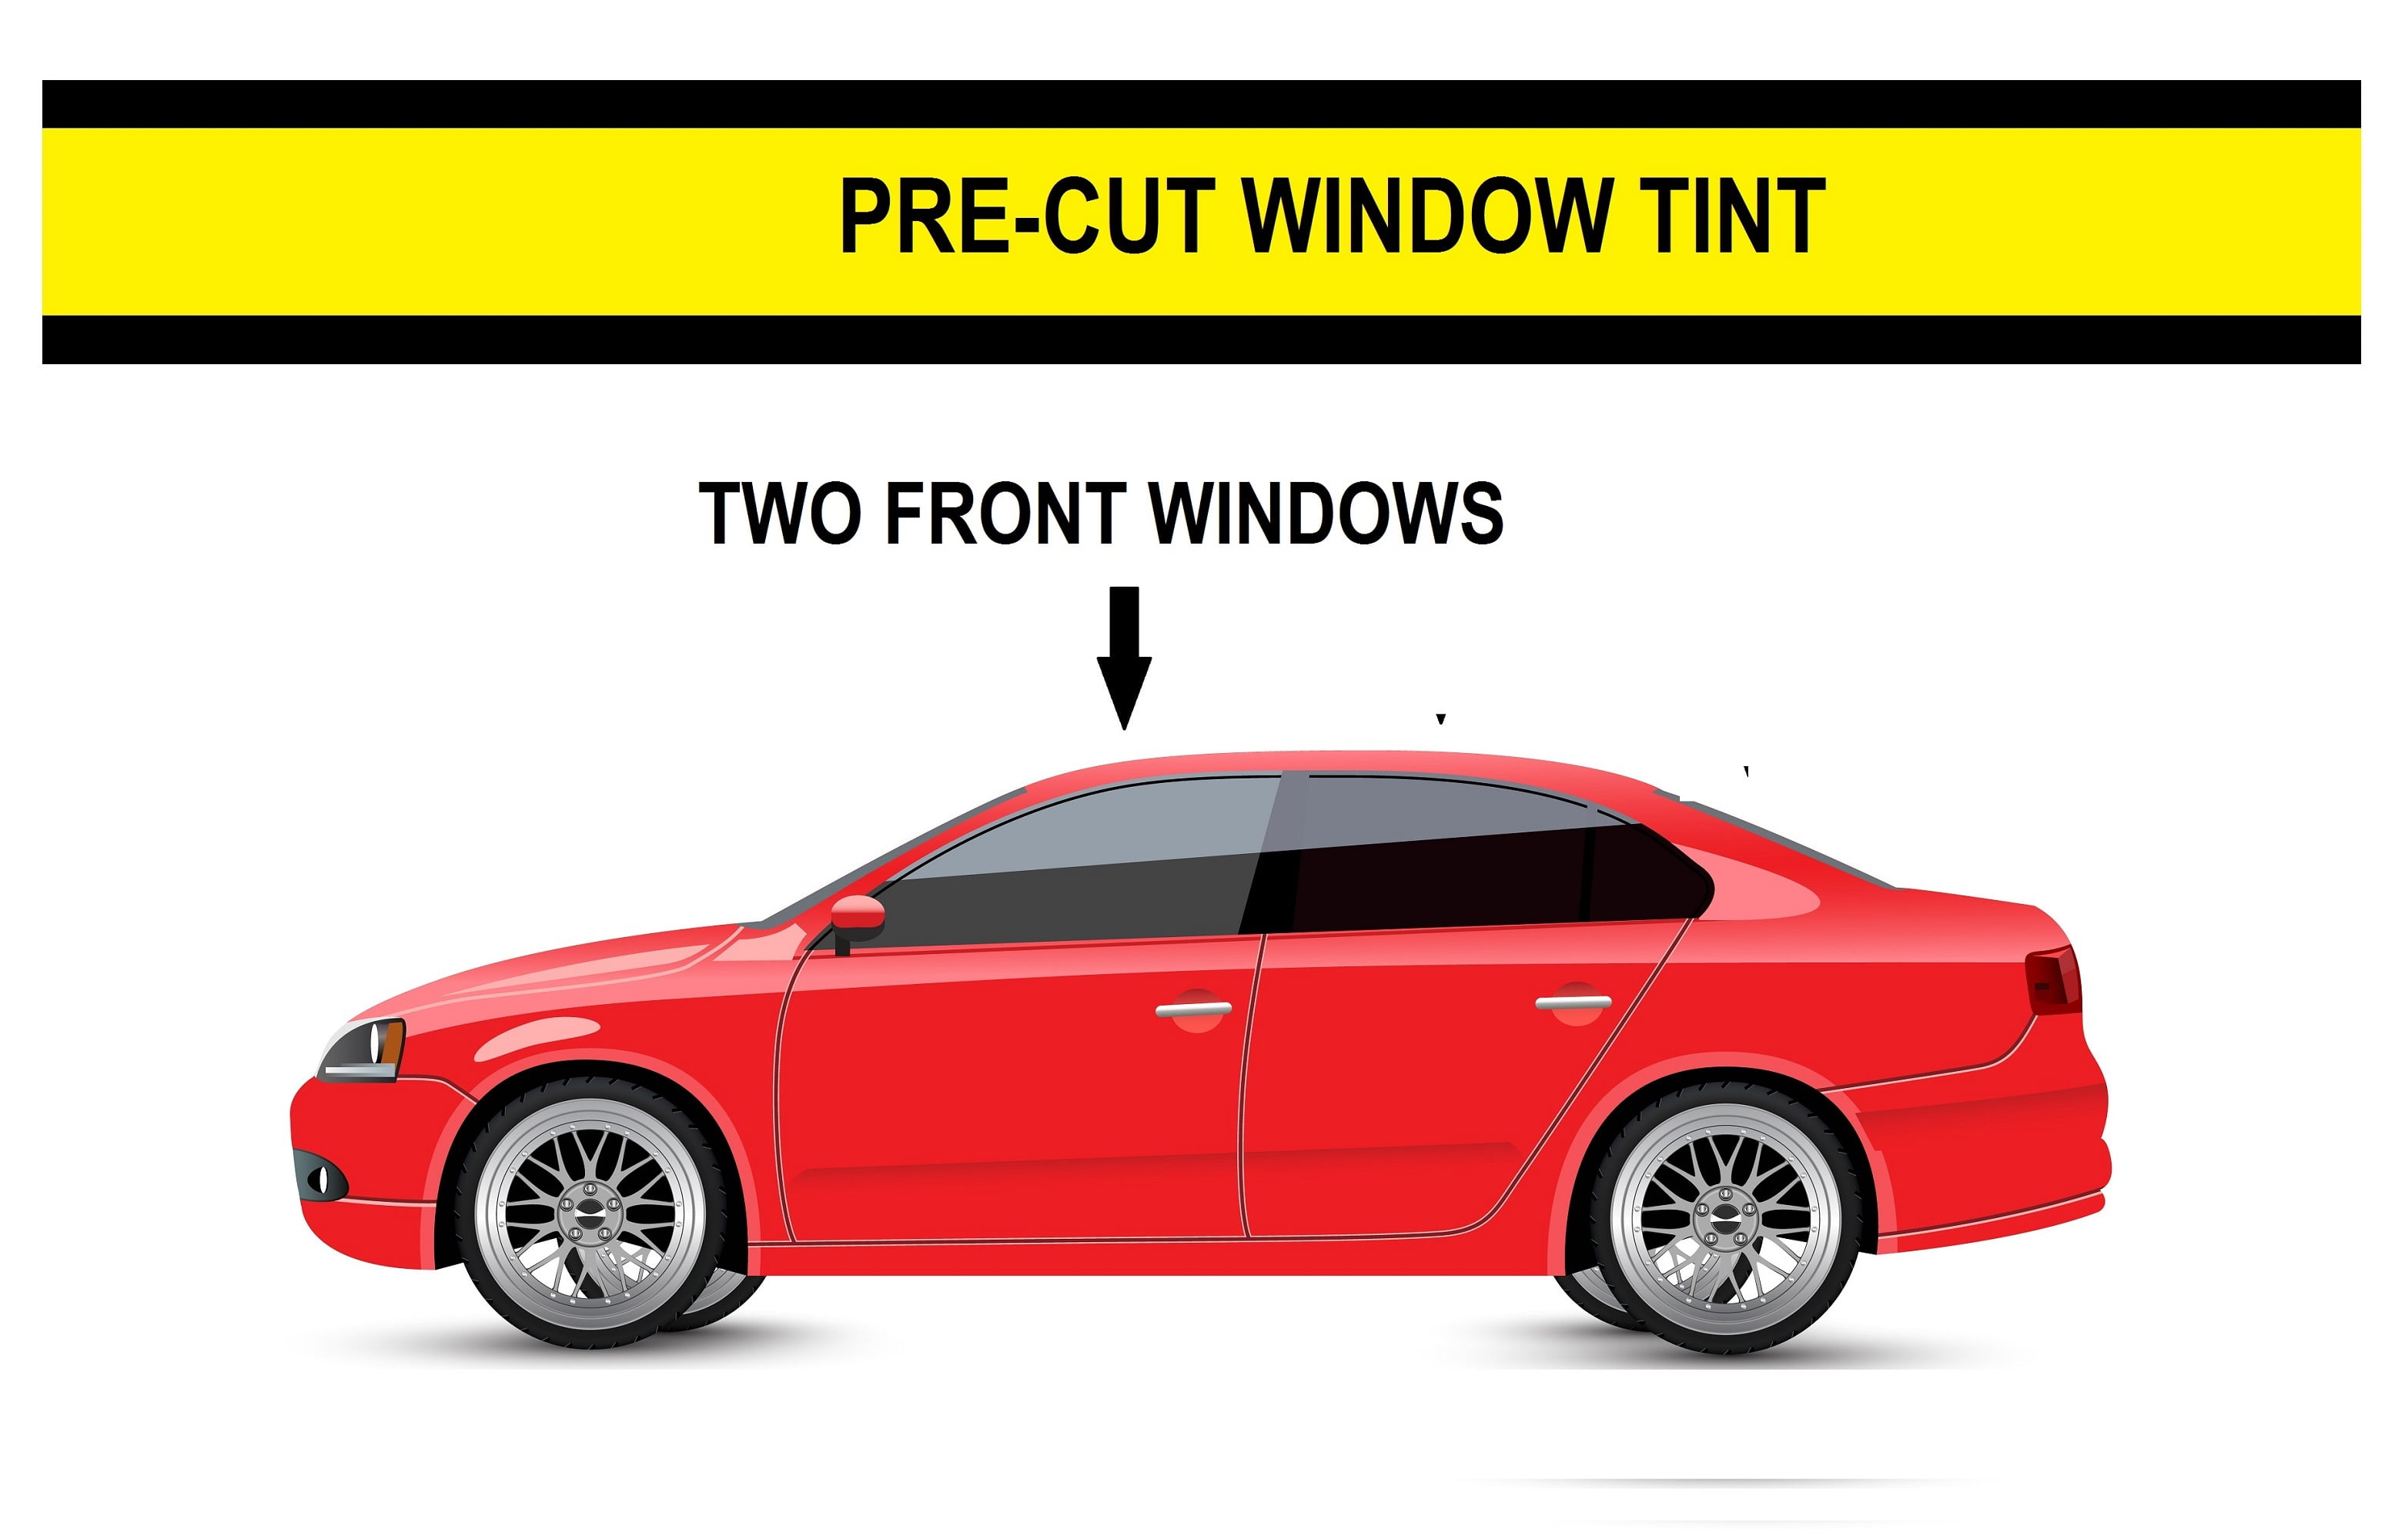 PreCut Window Film for Ford Excursion 00-06 Front Doors any Tint Shade